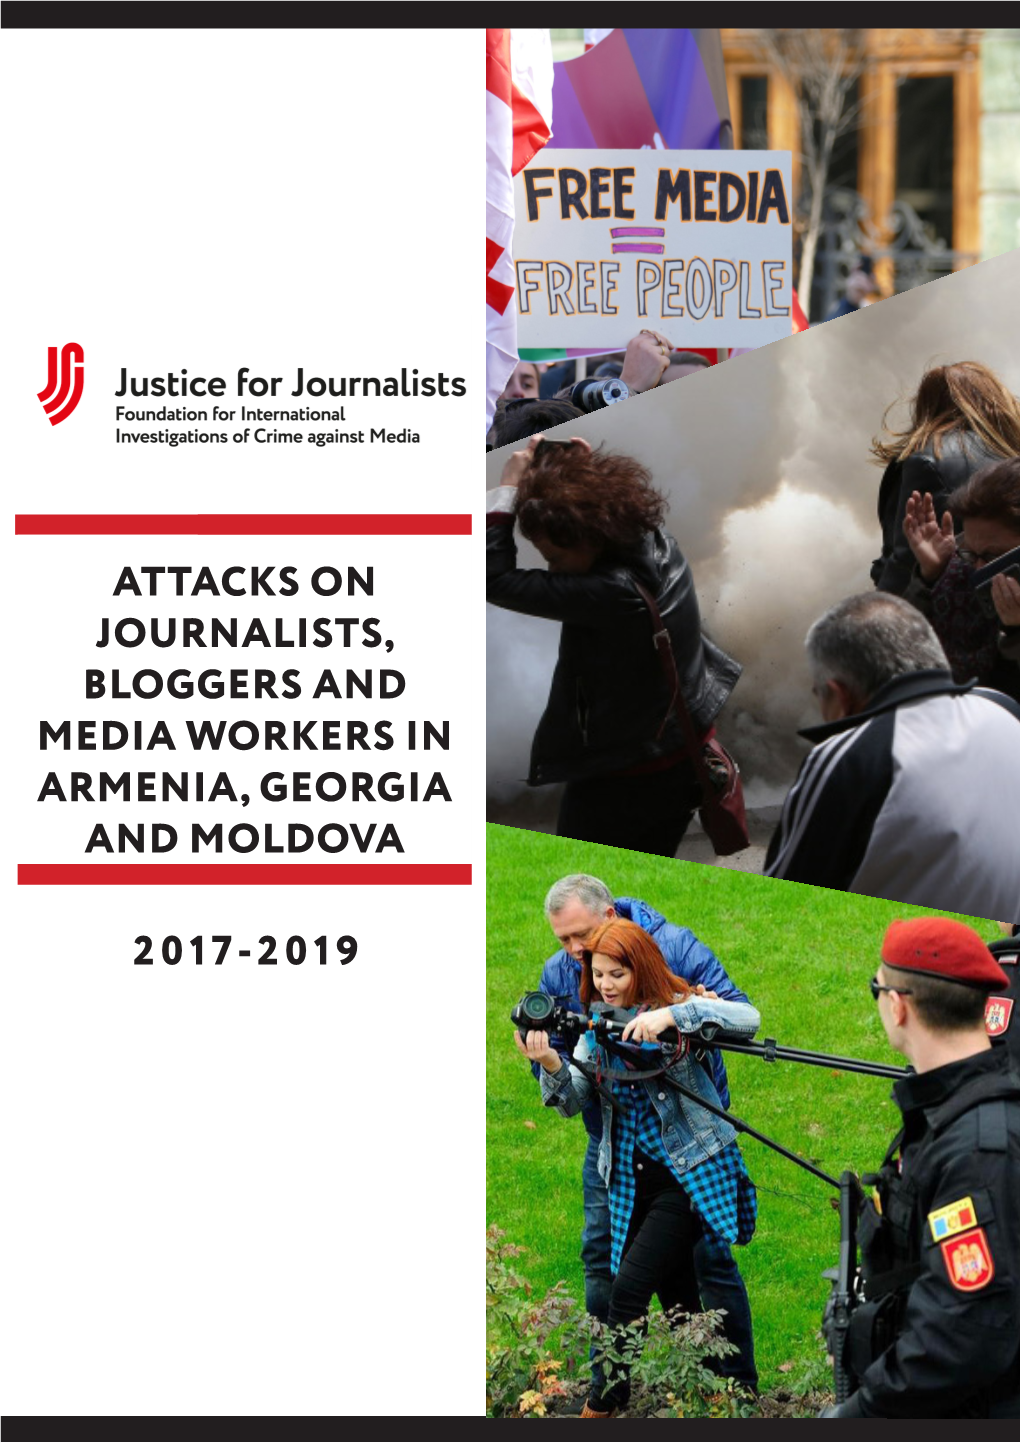 Attacks on Journalists, Bloggers and Media Workers in Armenia, Georgia and Moldova 2017-2019